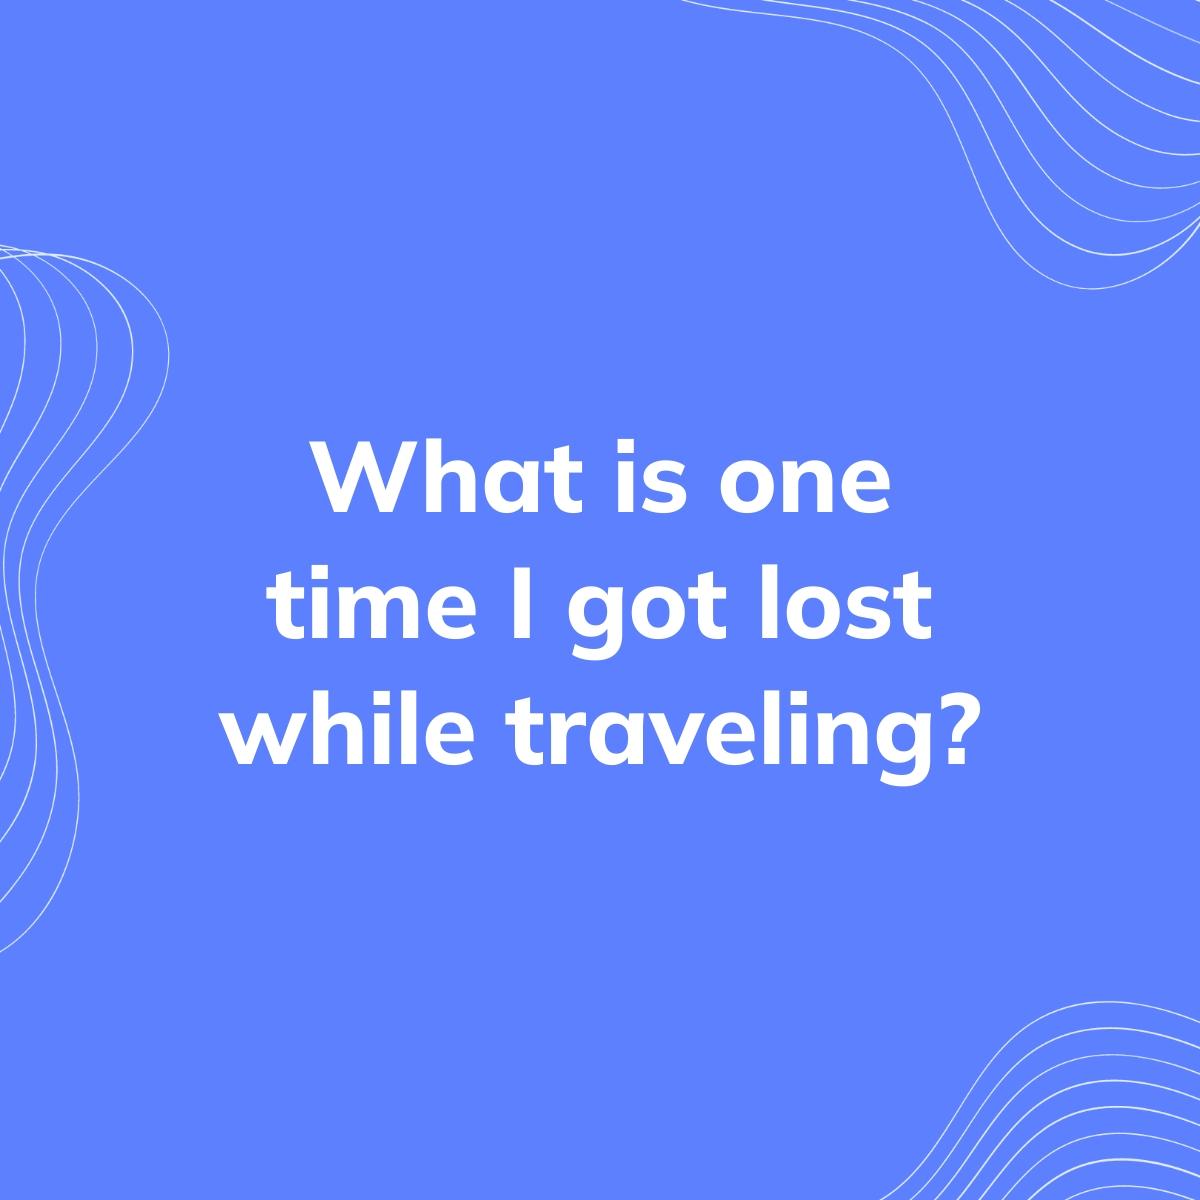 Journal Prompt: What is one time I got lost while traveling?